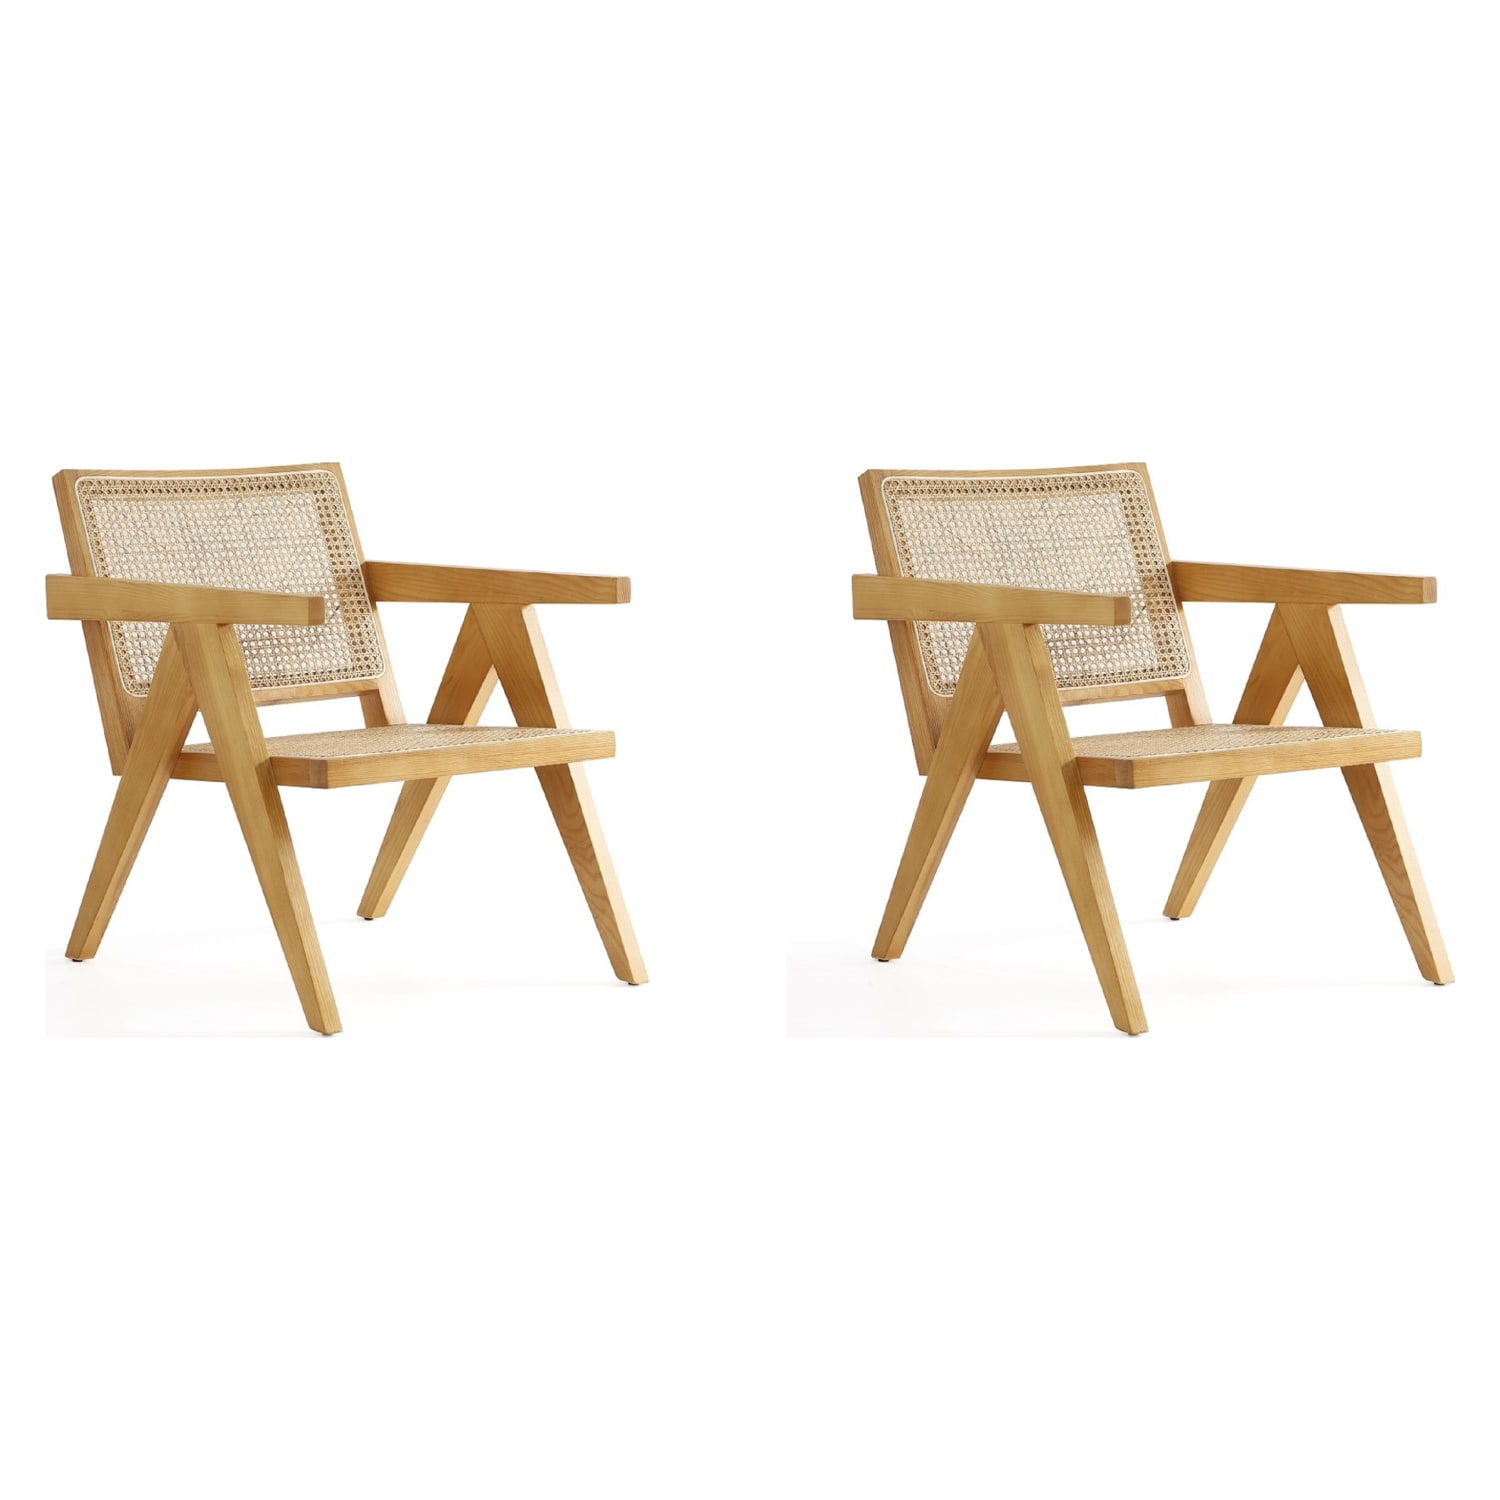 Hamlet Accent Chair in Nature Cane - Set of 2